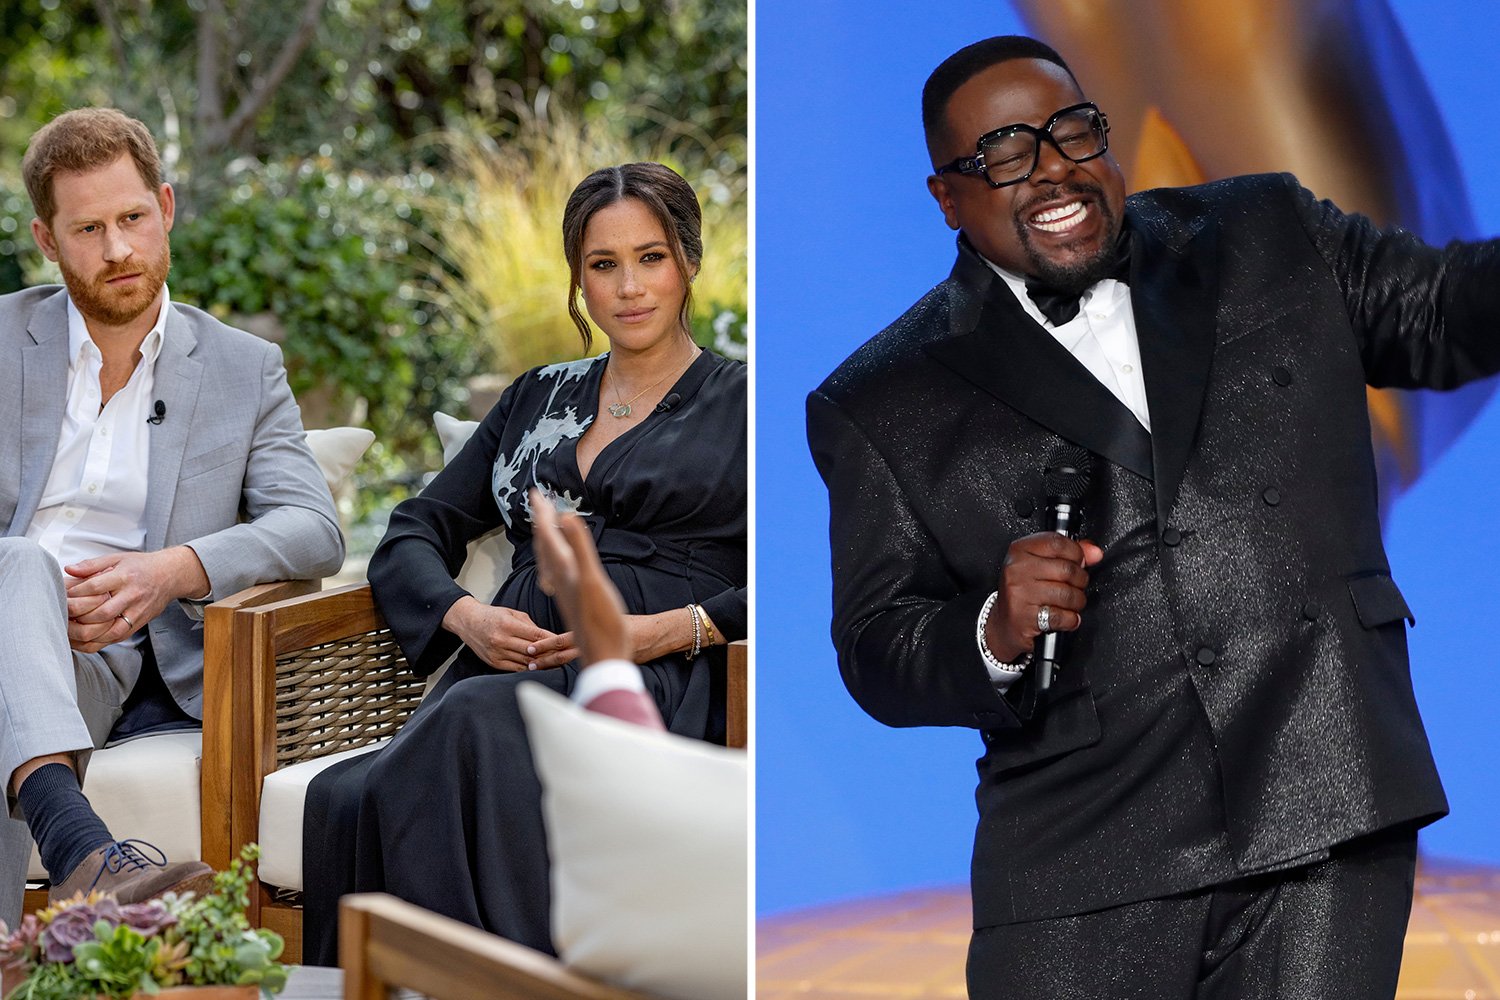 Prince Harry and Meghan Markle humiliated by Emmys host over Oprah interview